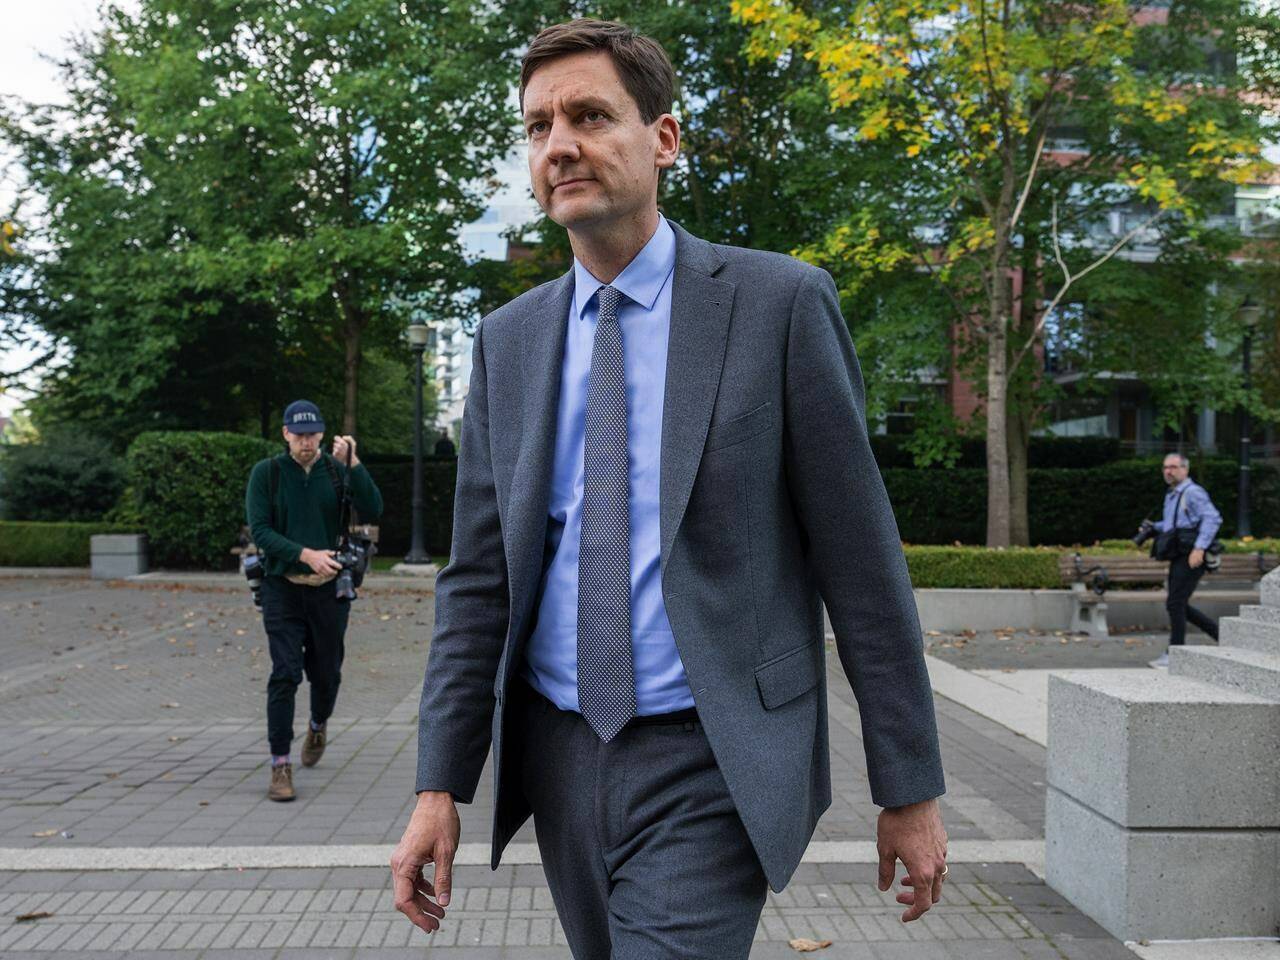 Former B.C. attorney general and housing minister David Eby arrives for a news conference in a park in downtown Vancouver, Thursday, Oct. 20, 2022. THE CANADIAN PRESS/Jonathan Hayward